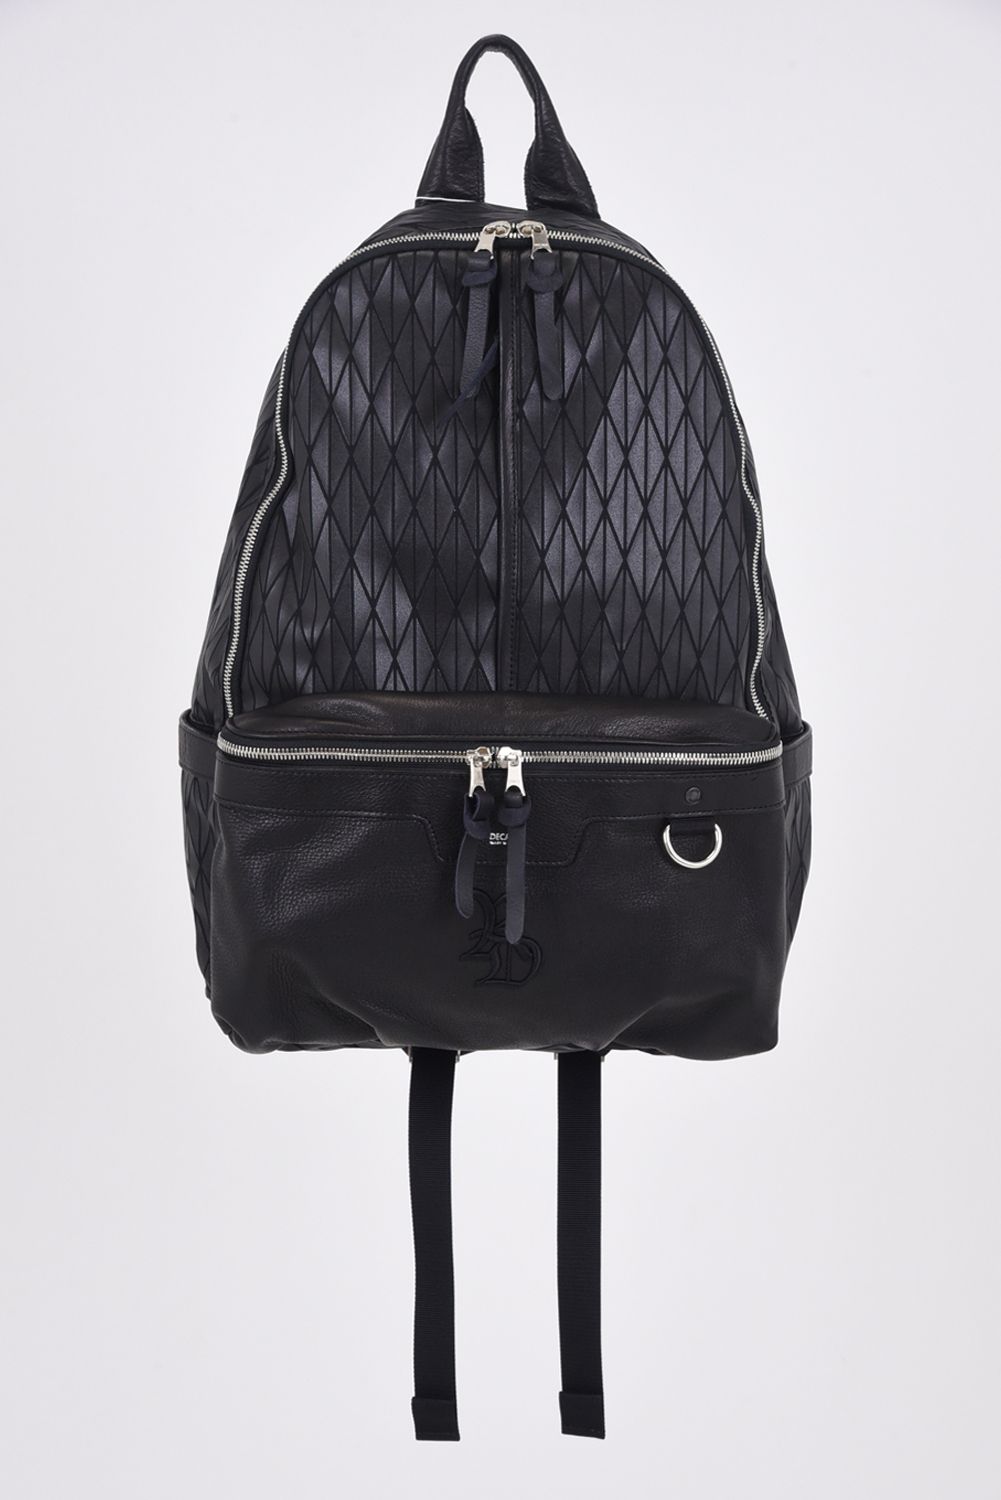 RESOUND CLOTHING - DECADE COLLABO BACK PACK / リサウンド ...